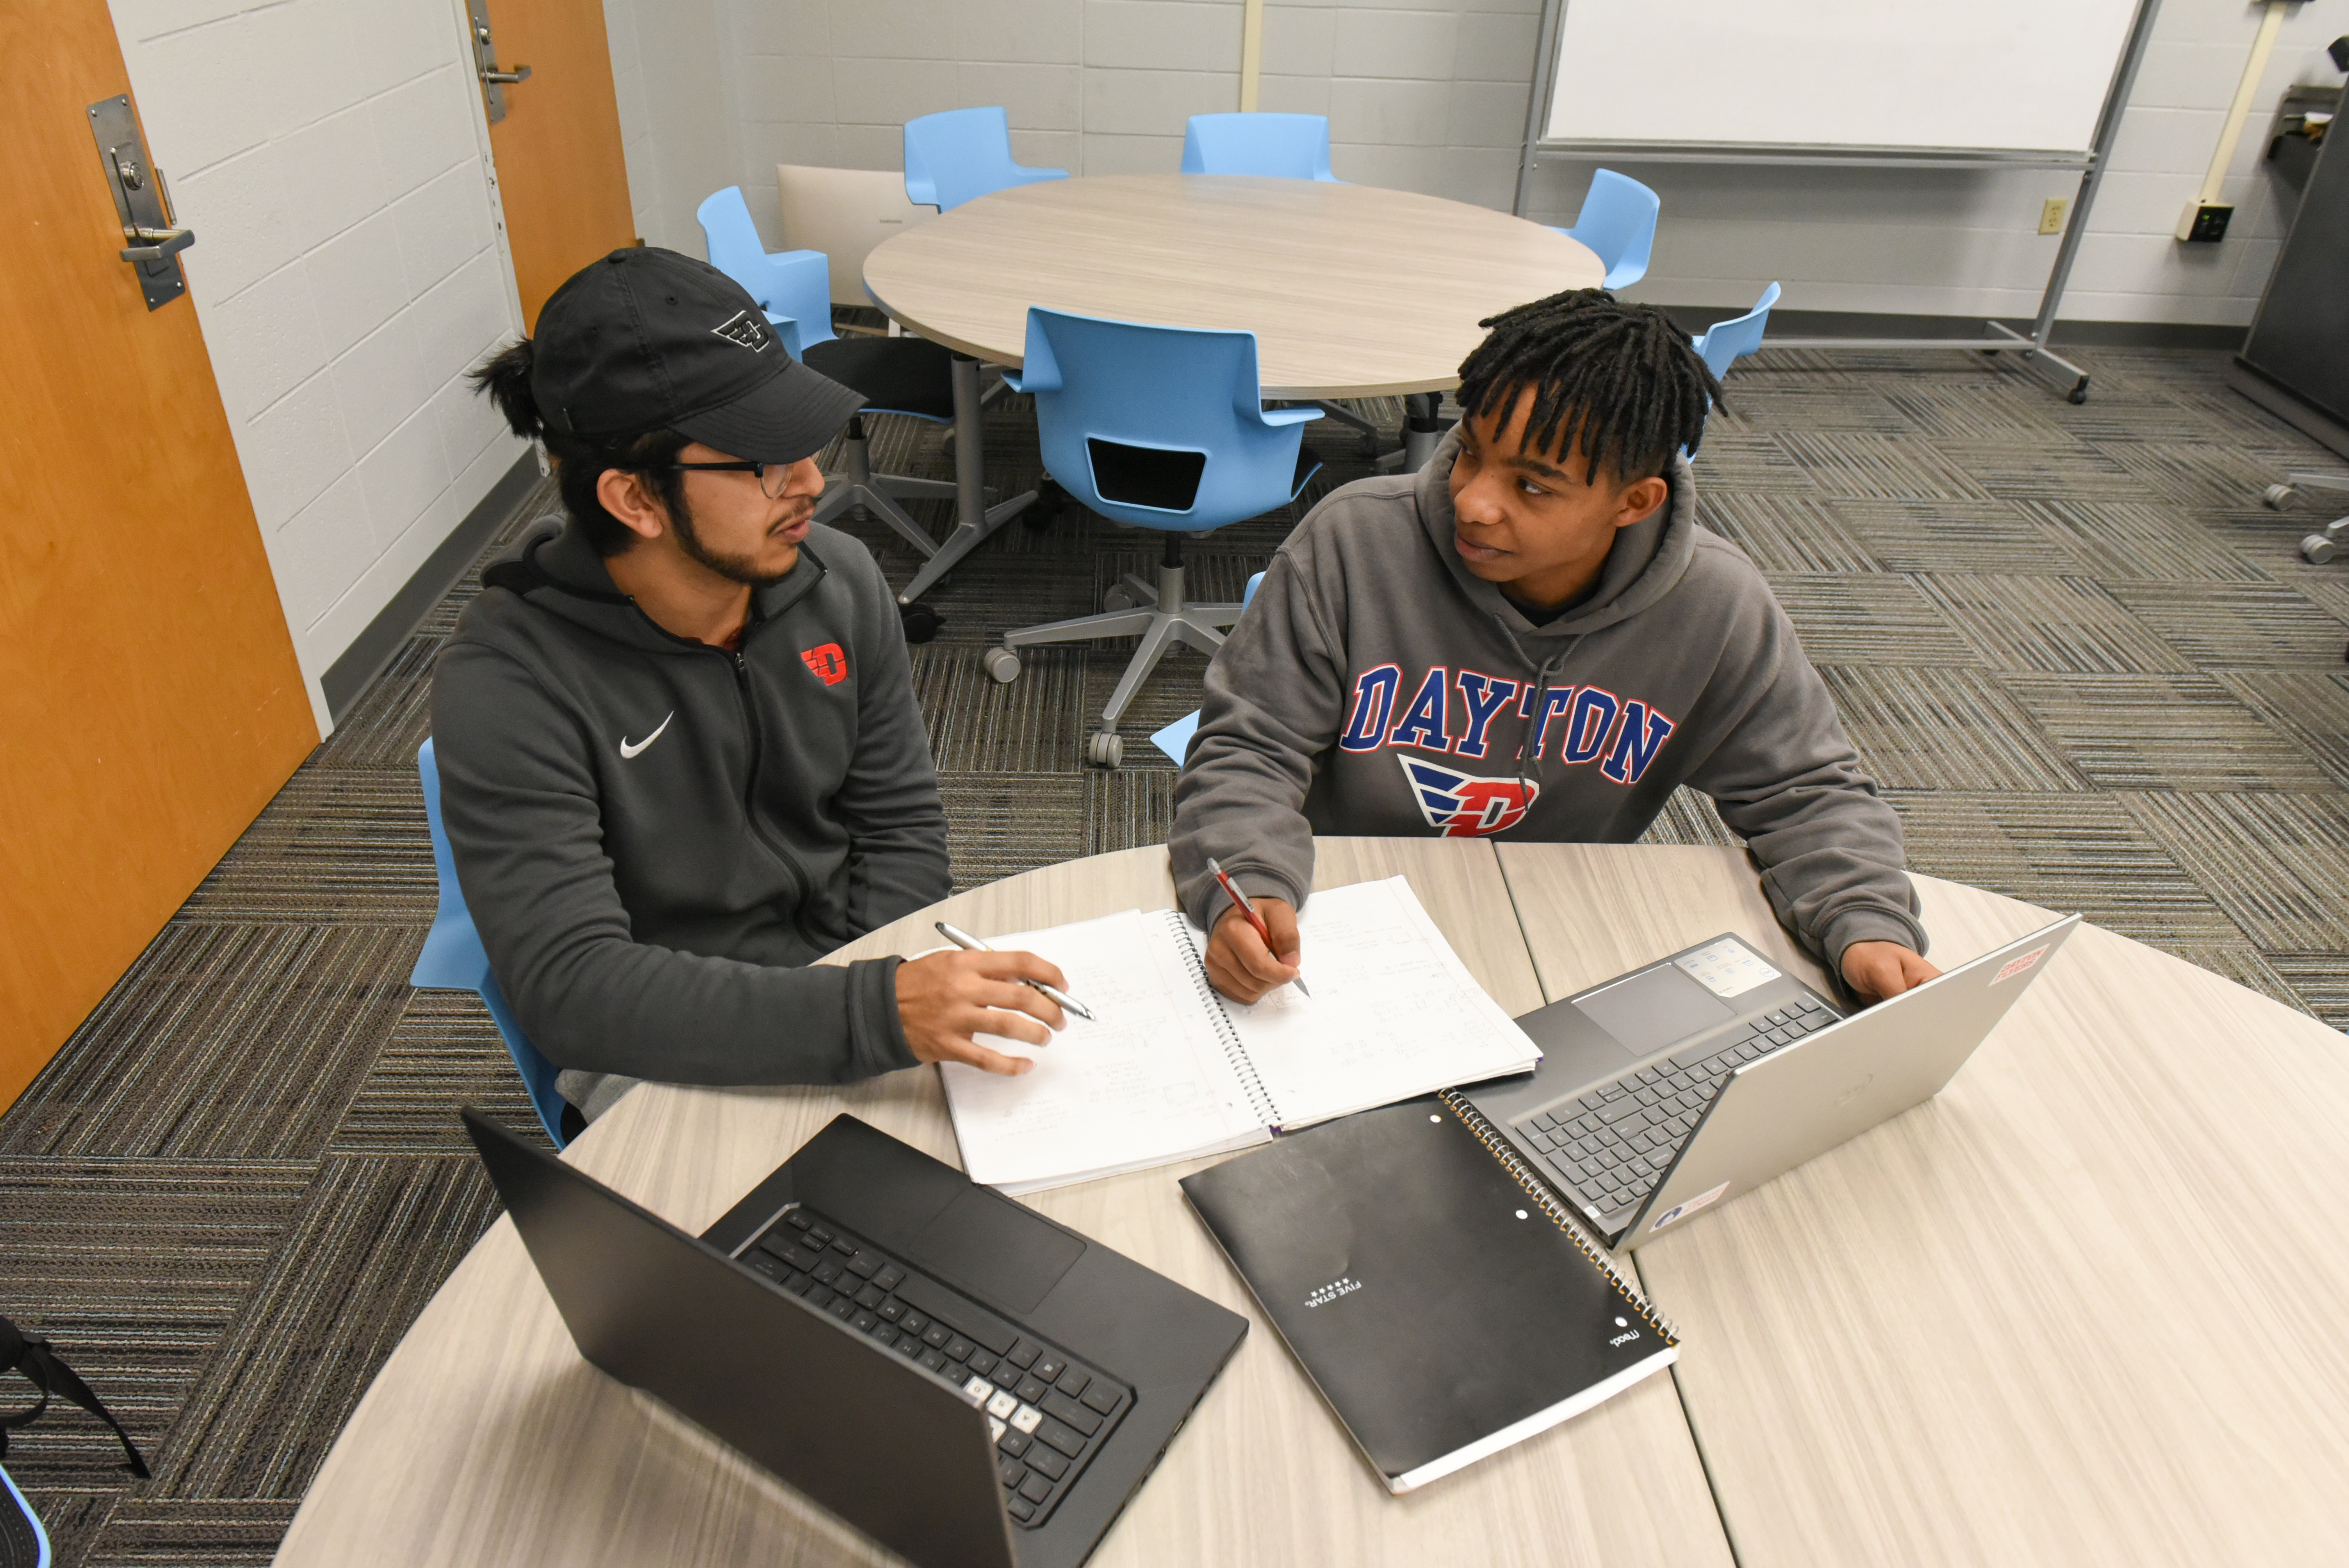 Two students studying with each other at a table